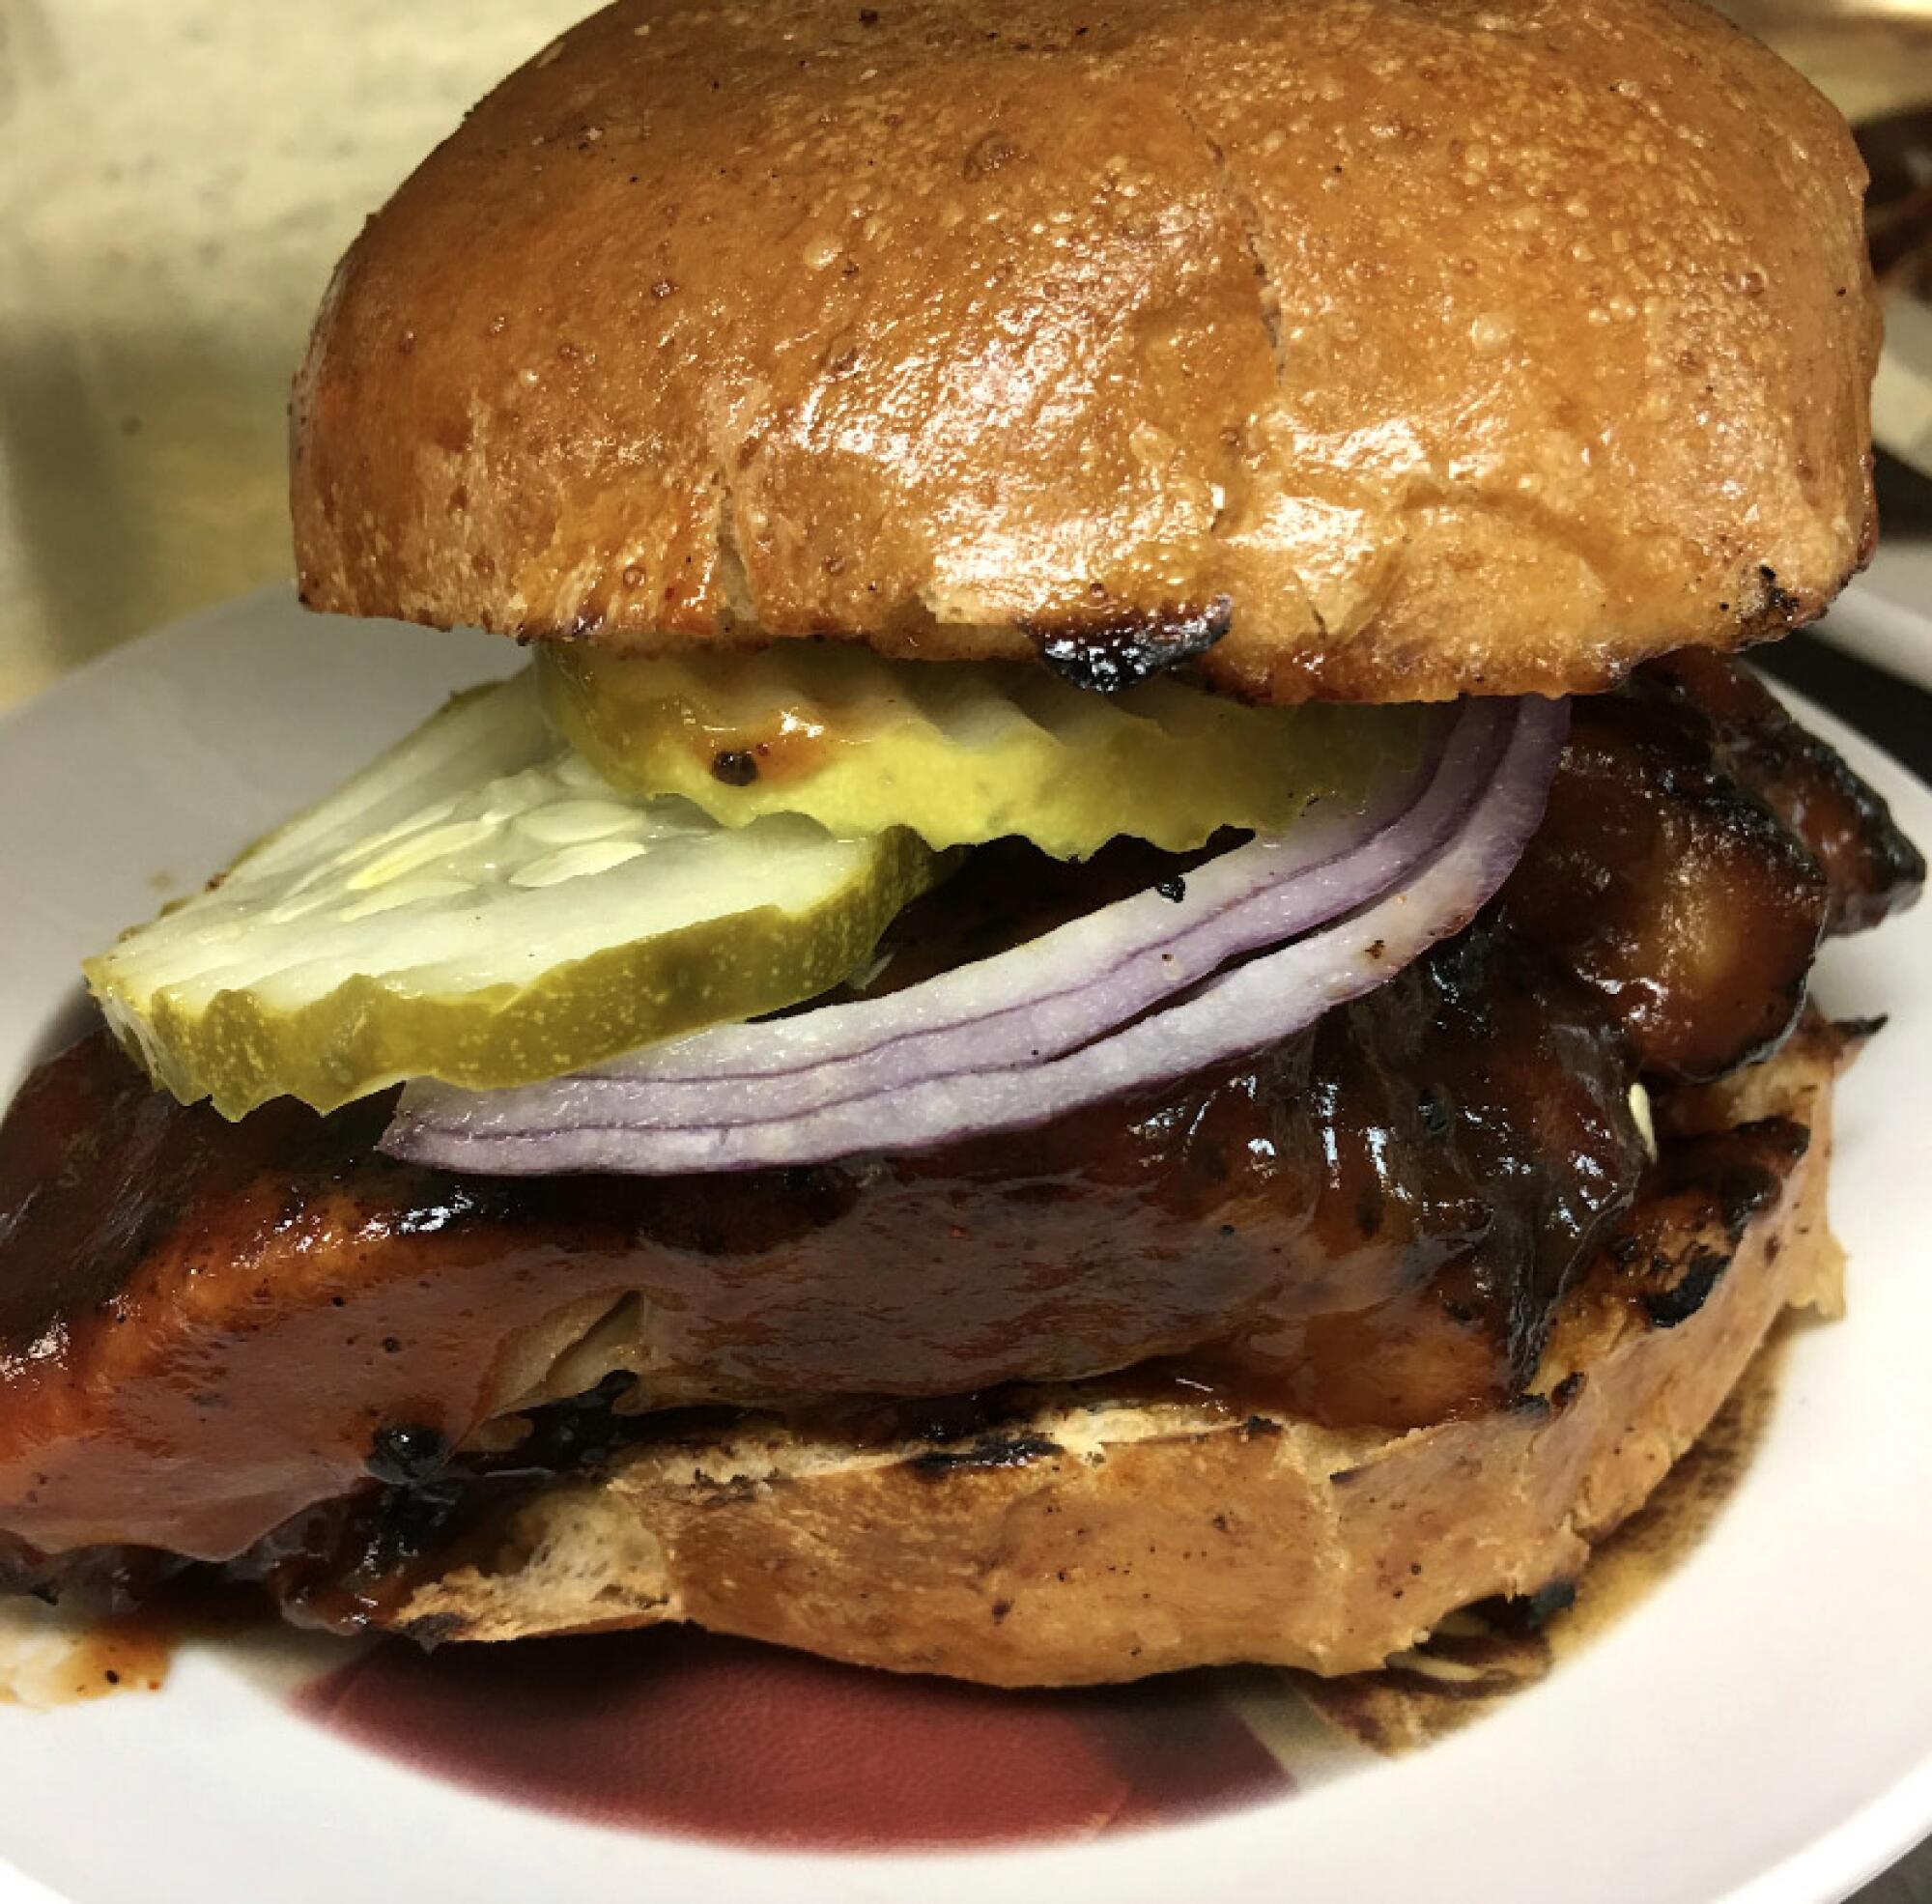 Boneless ribs with sliced onion and pickles on a roll